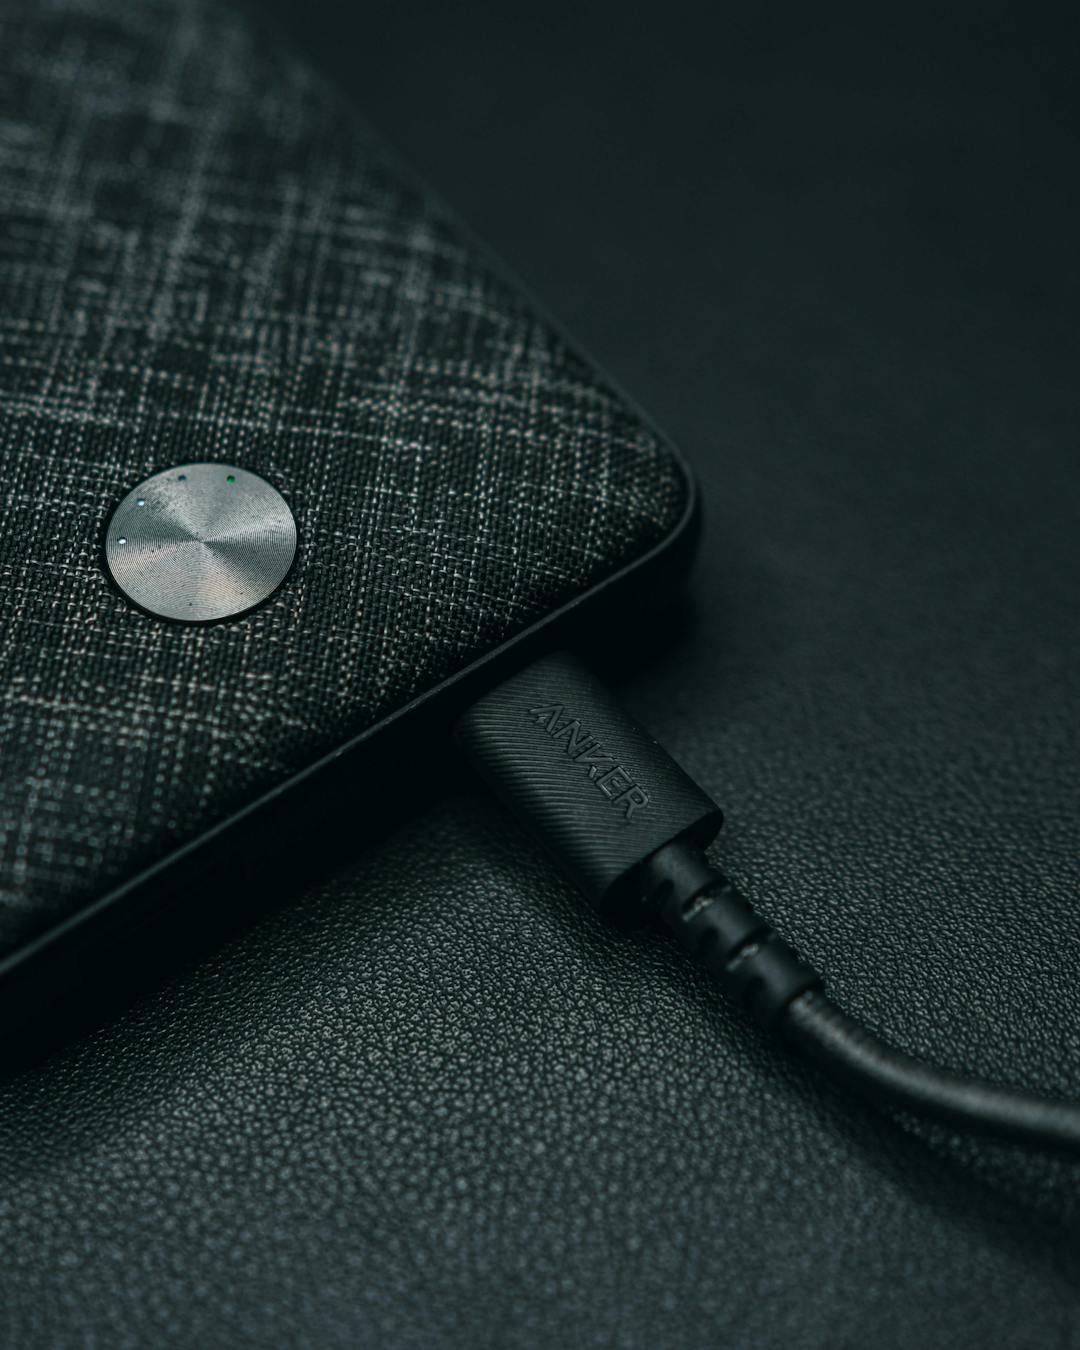 A powerbank charging, with the brand 'ANKER' printed on the cable